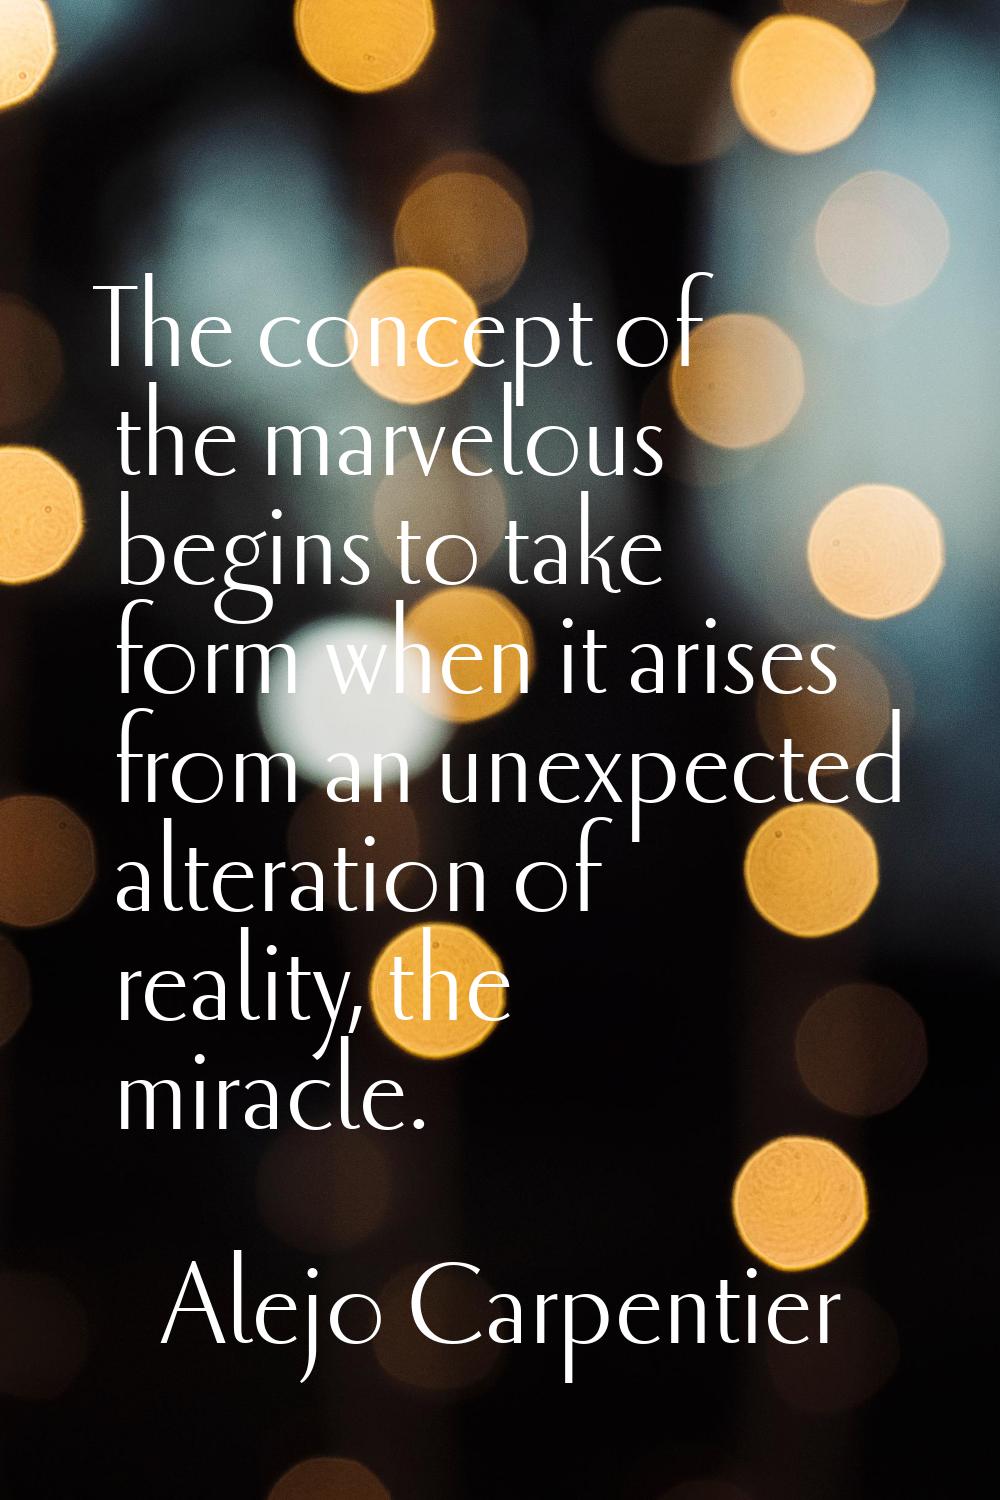 The concept of the marvelous begins to take form when it arises from an unexpected alteration of re